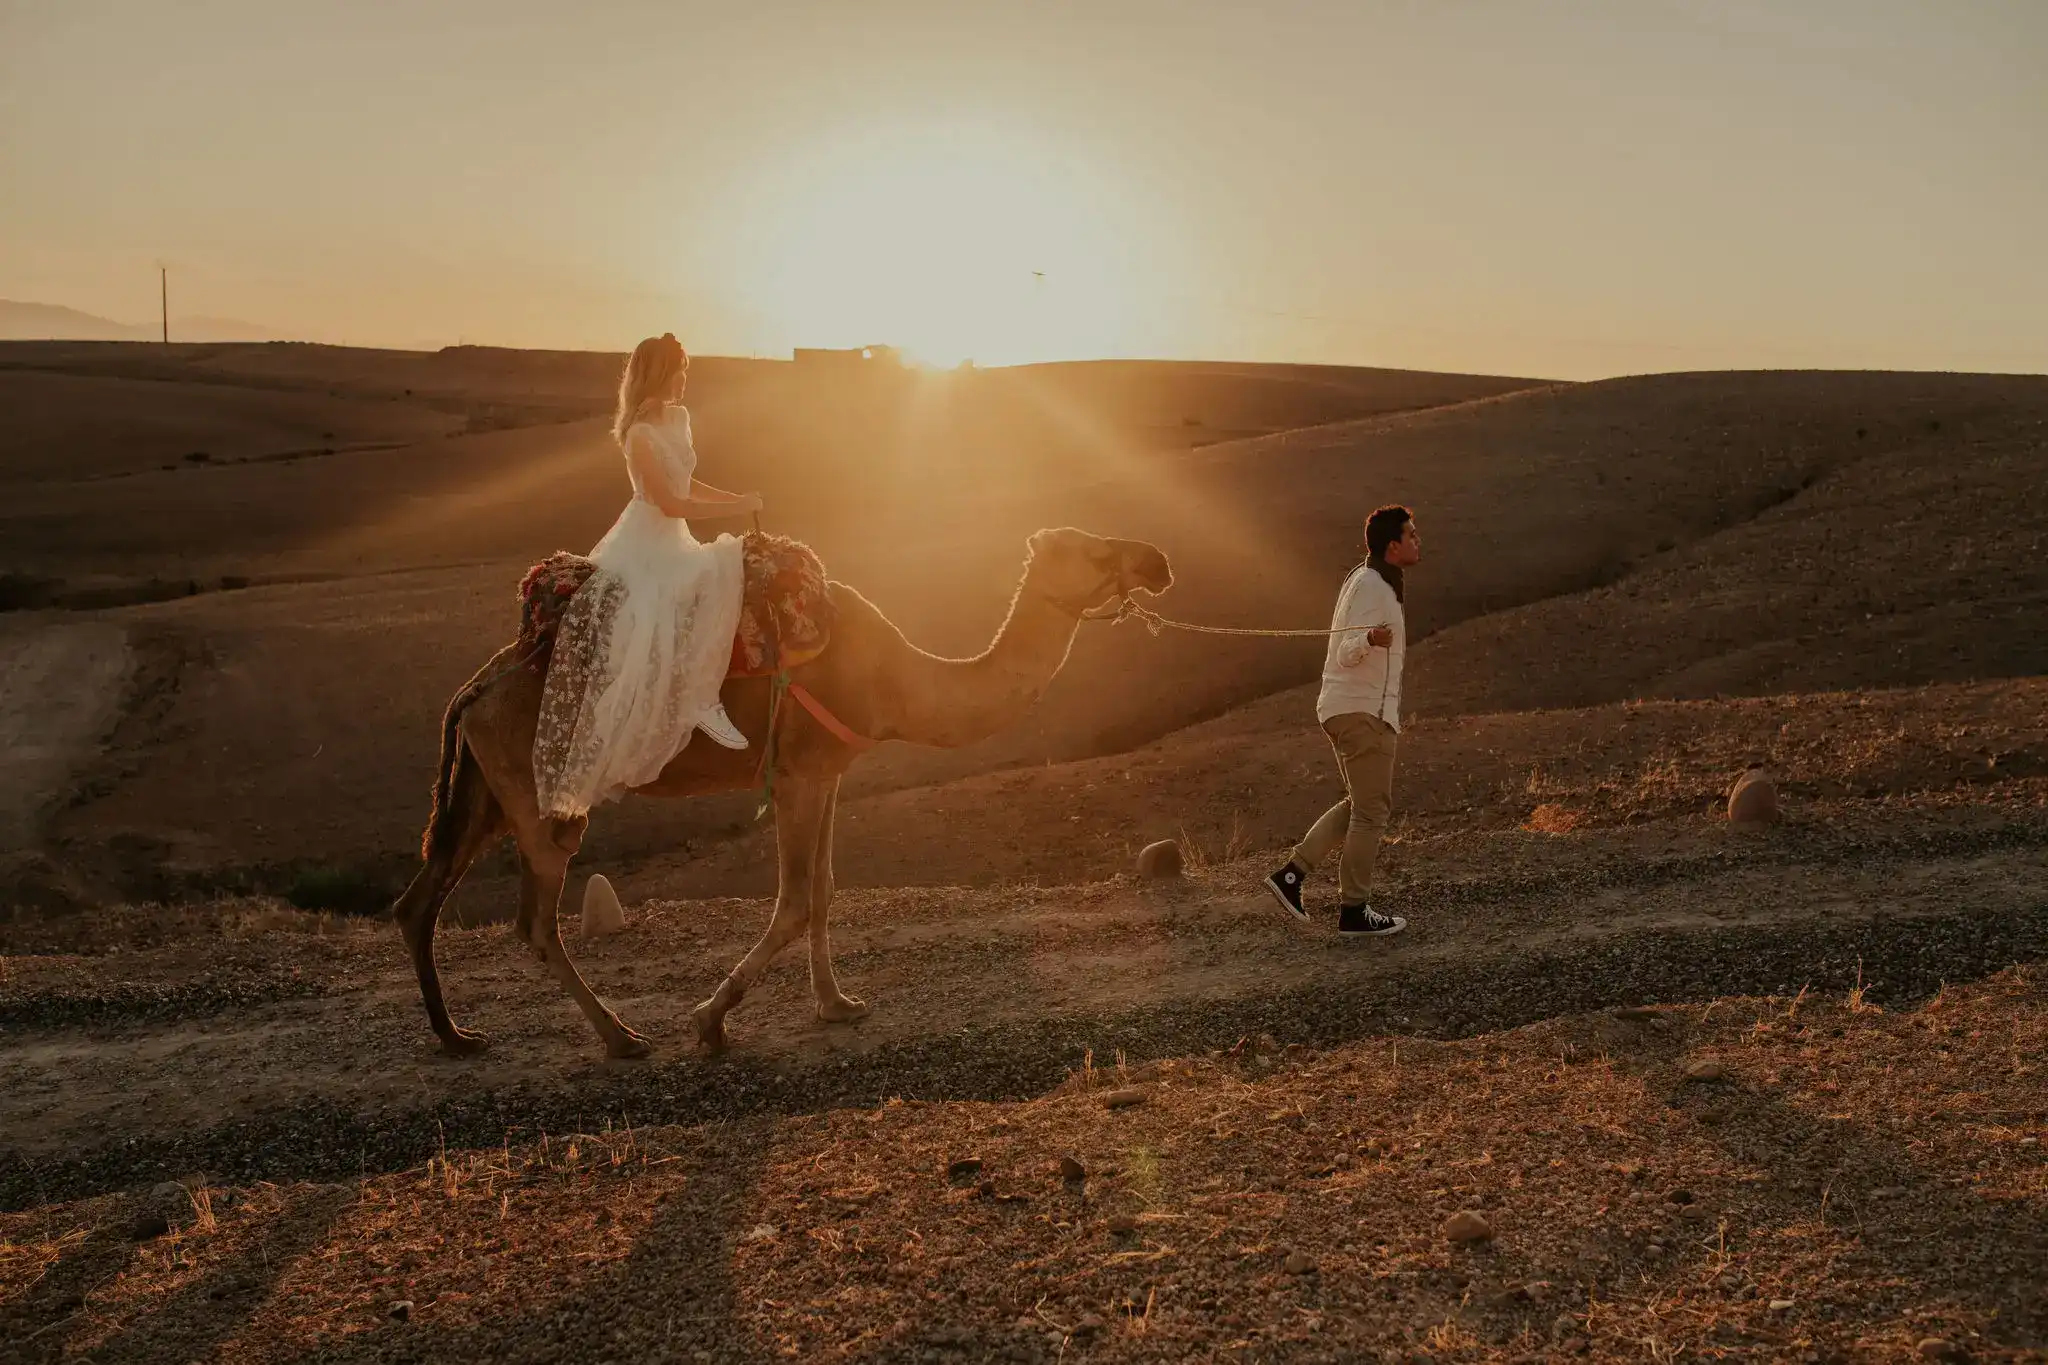 Couple elopement in Moroccan desert, doing a camel ride at sunset